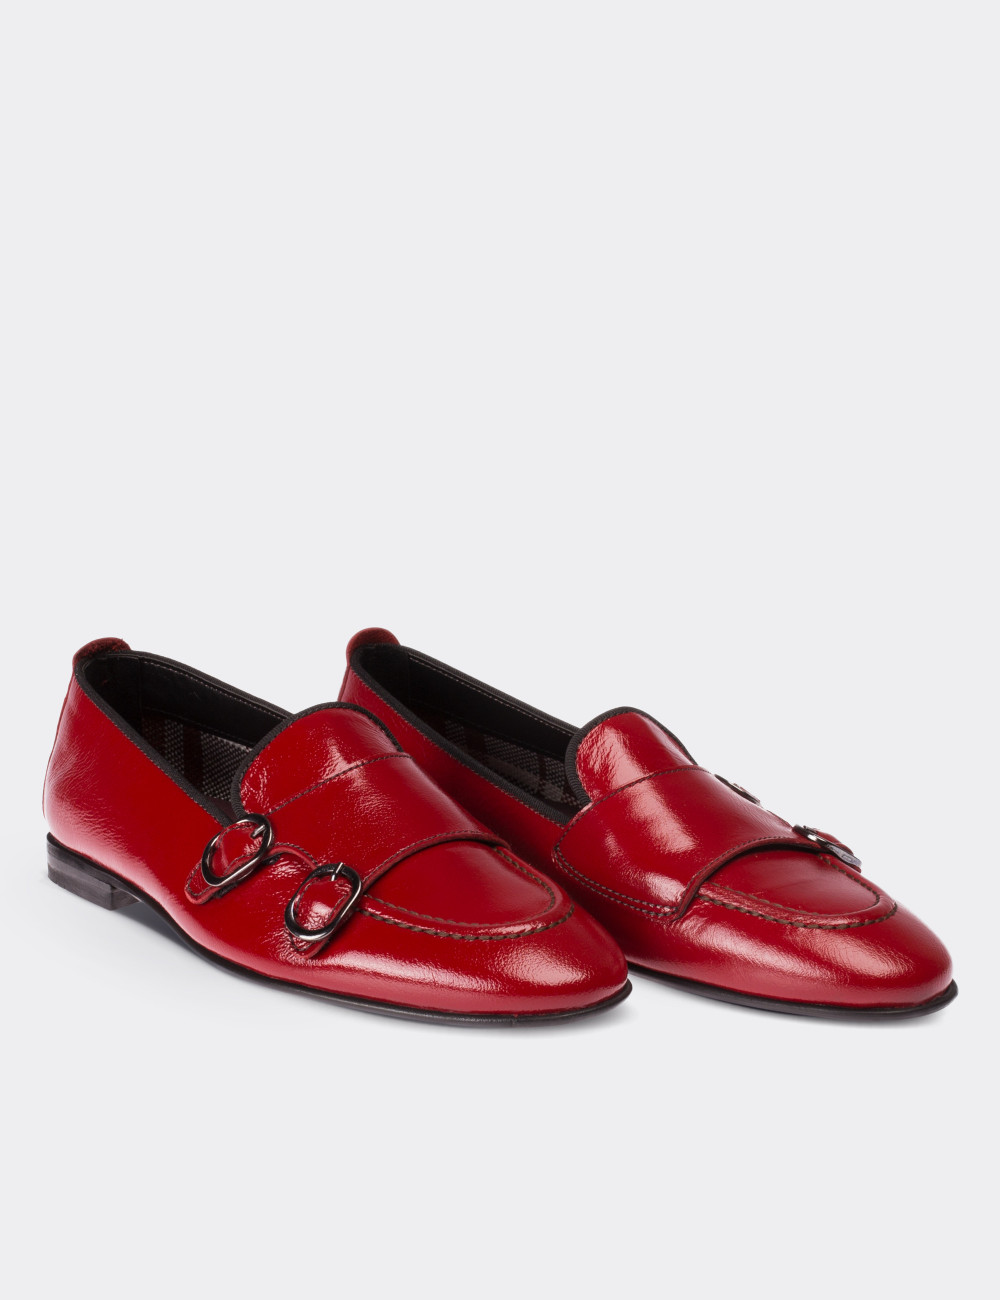 Red Patent Leather Loafers 01617ZKRMM01 - Deery